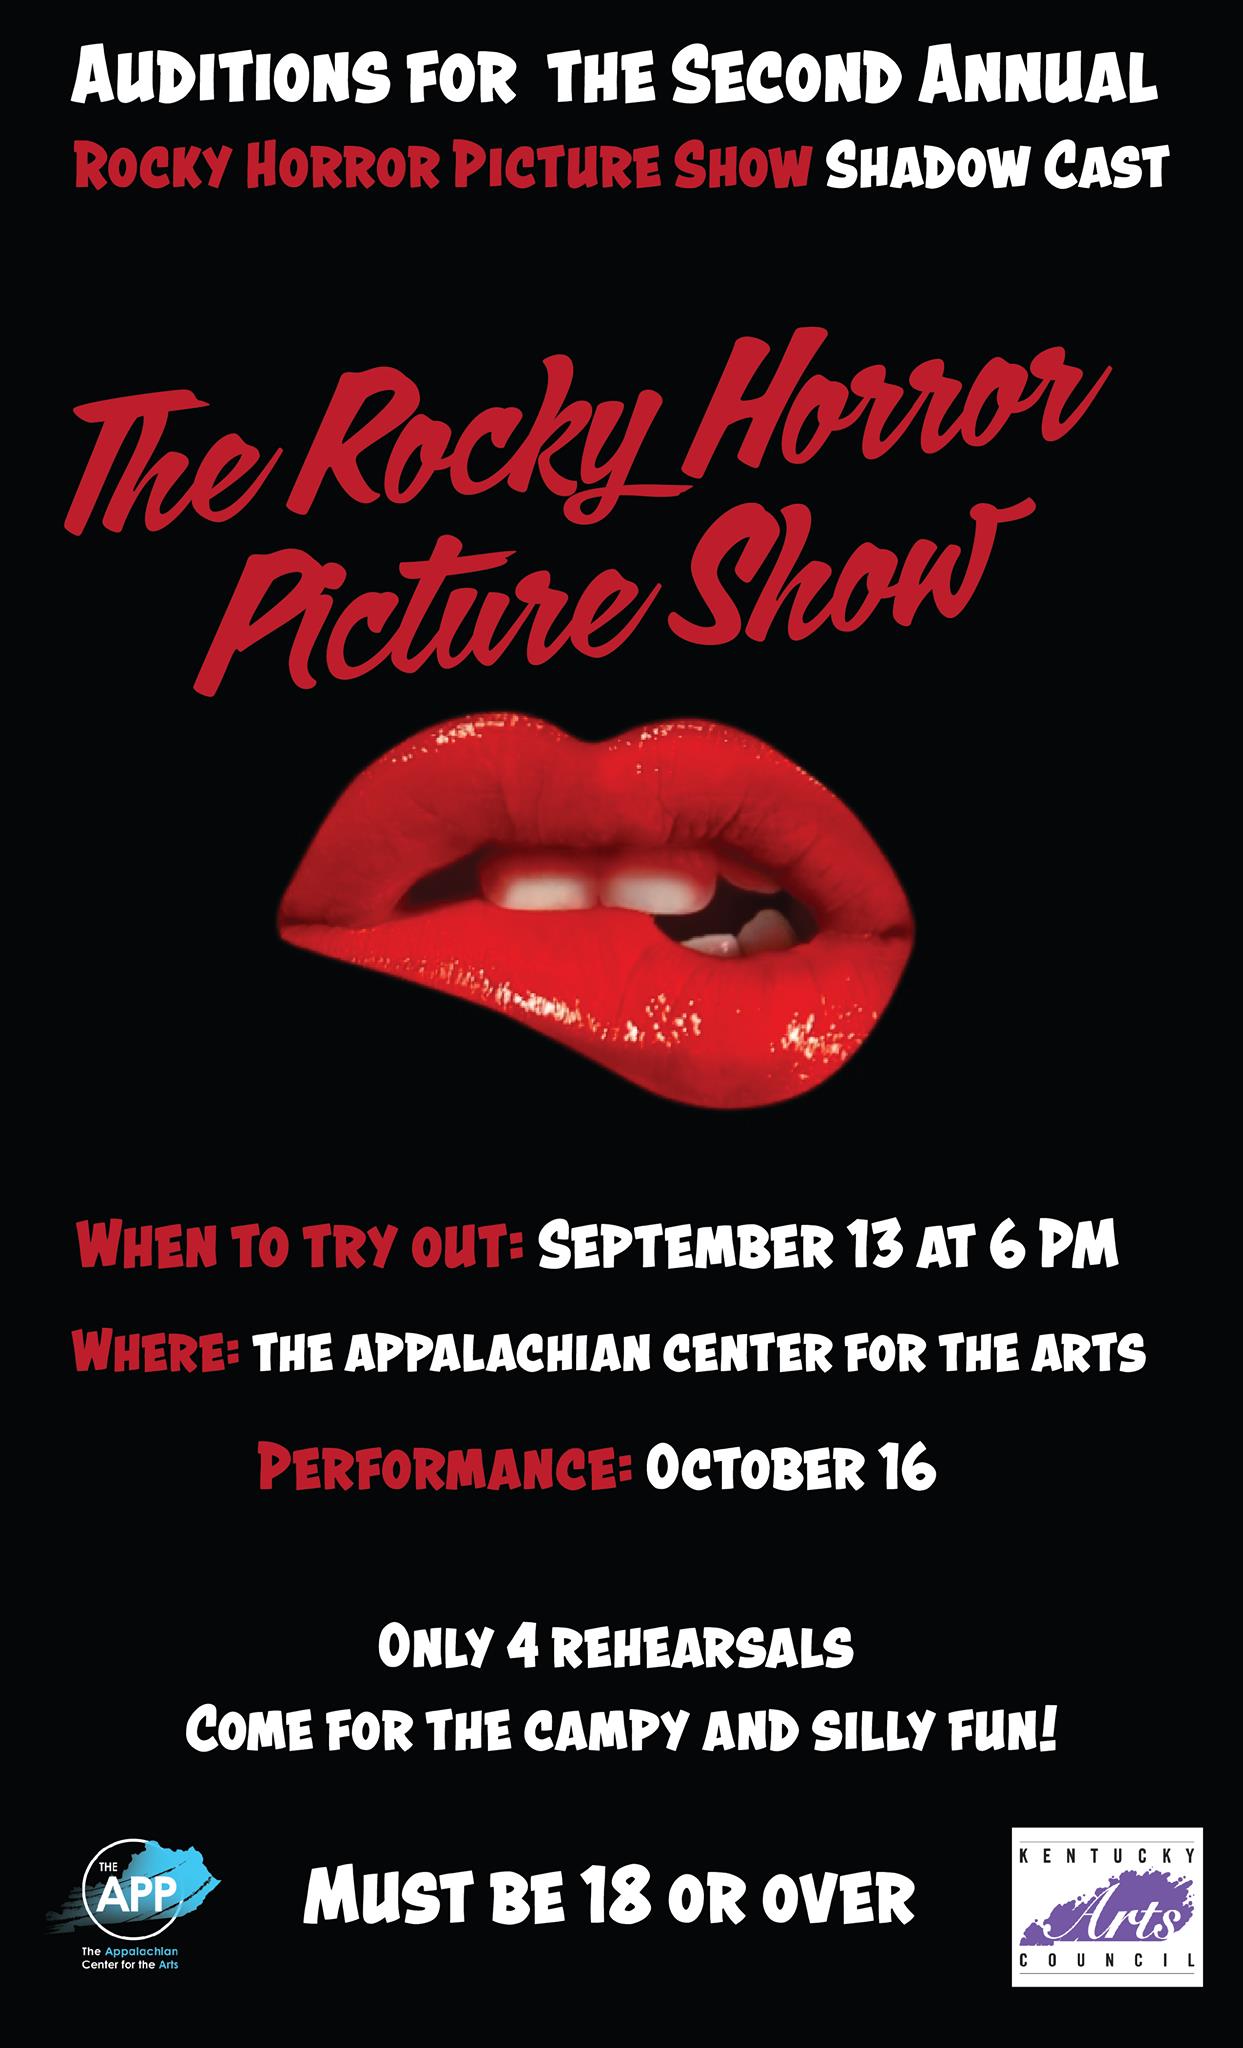 Auditions for the second annual Rocky Horror Picture Show